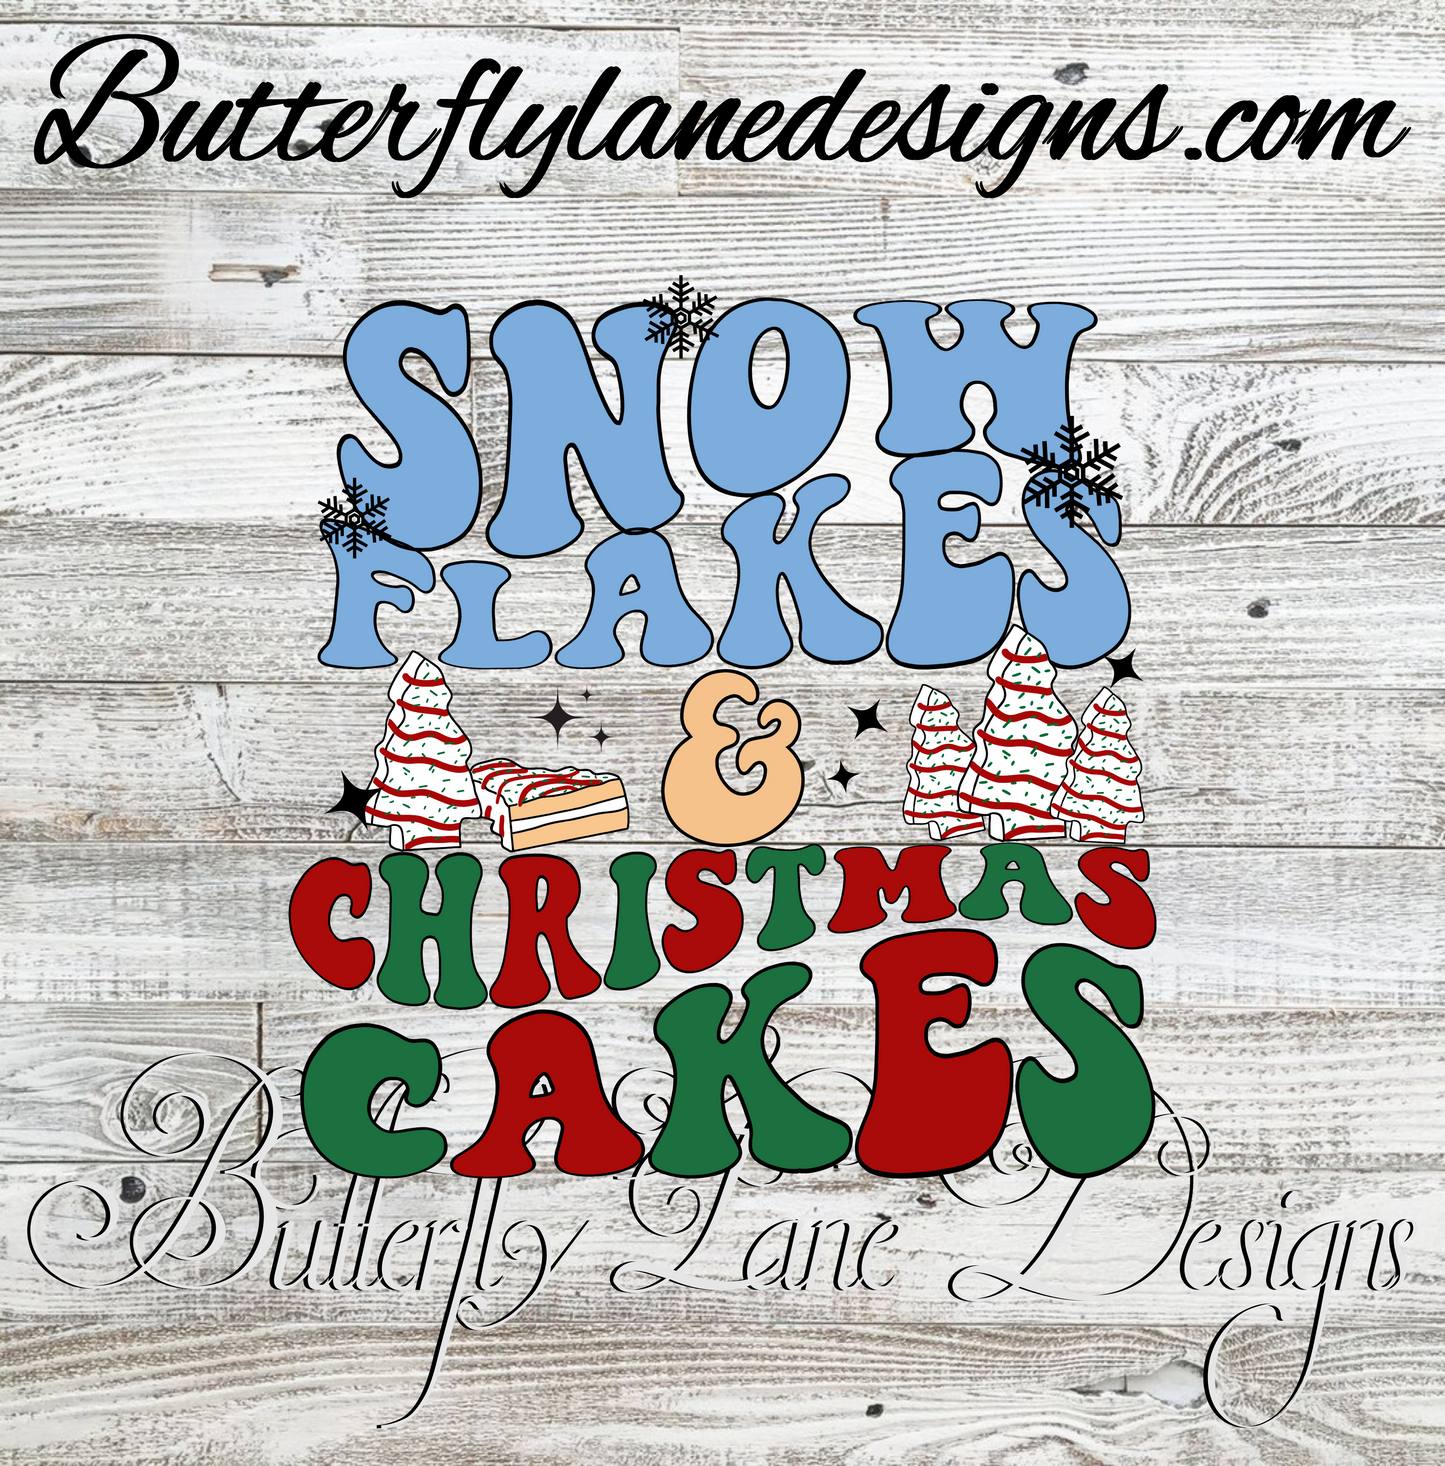 Snow flakes and Christmas tree cakes :: Clear Decal :: VC Decal